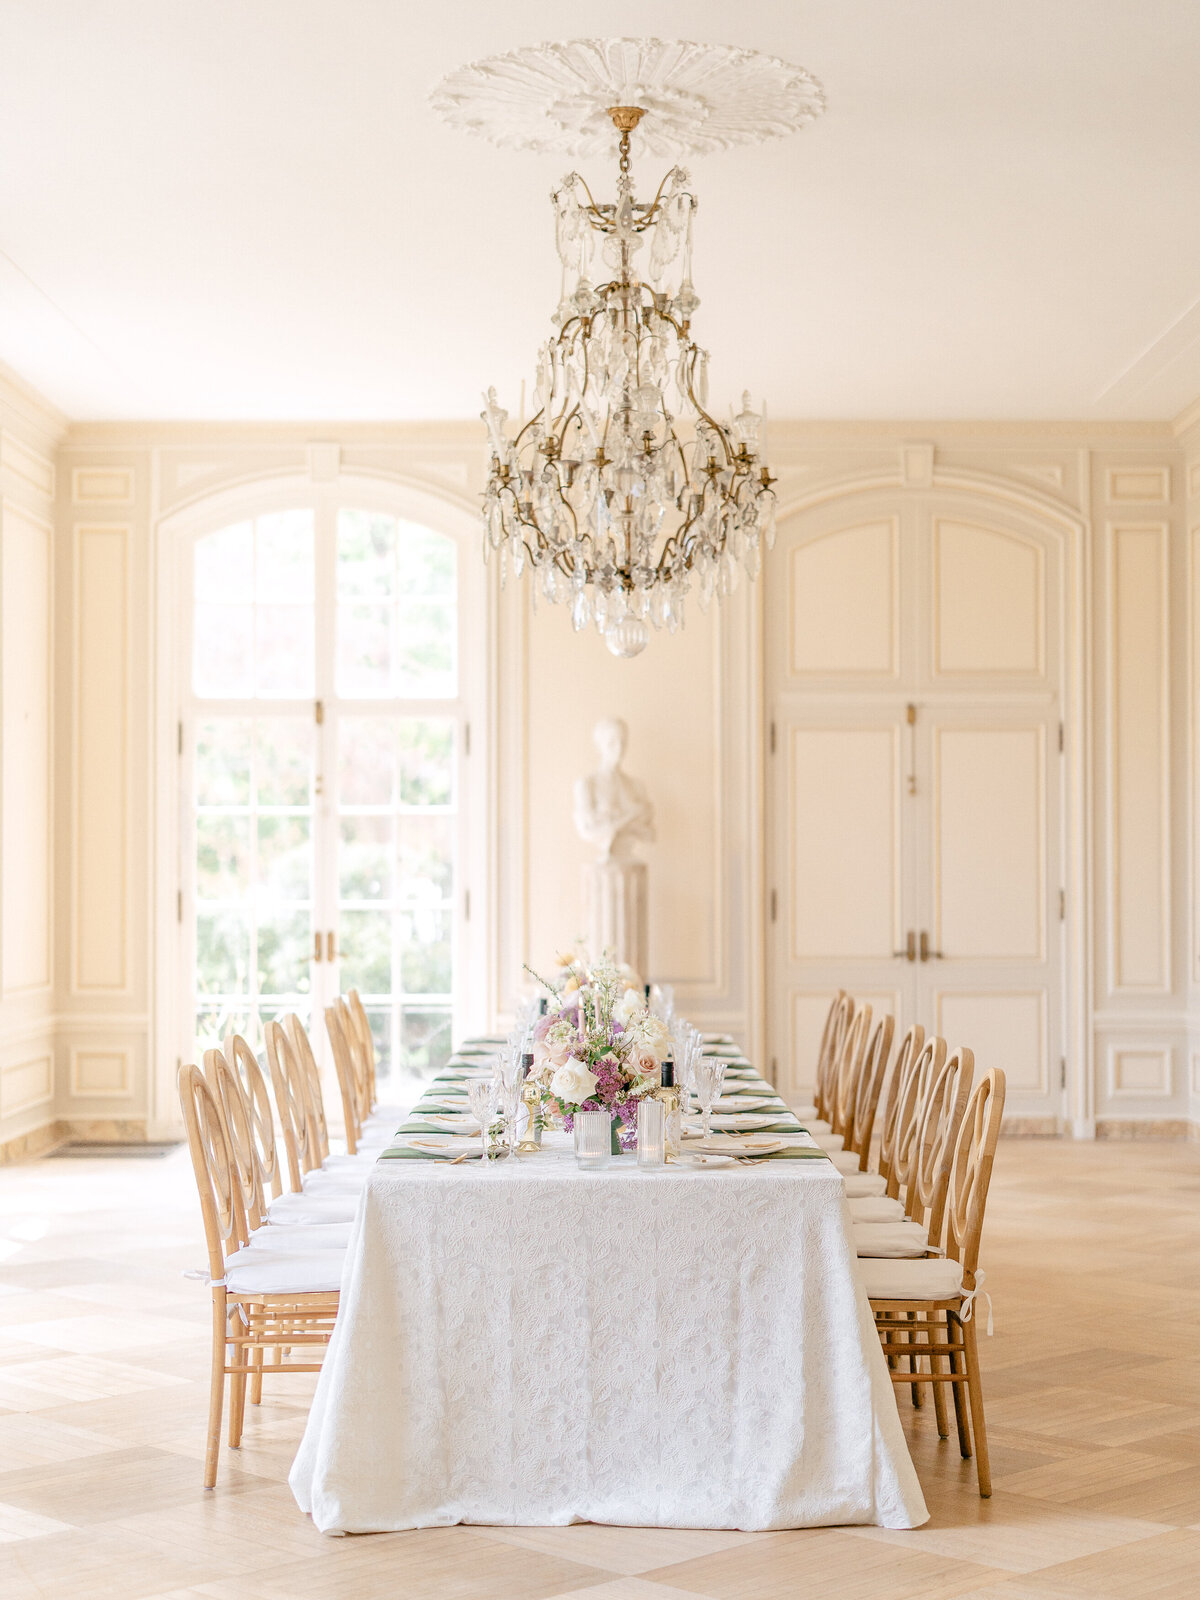 Newport Bois Dore Chateau Private Residence Wedding-25